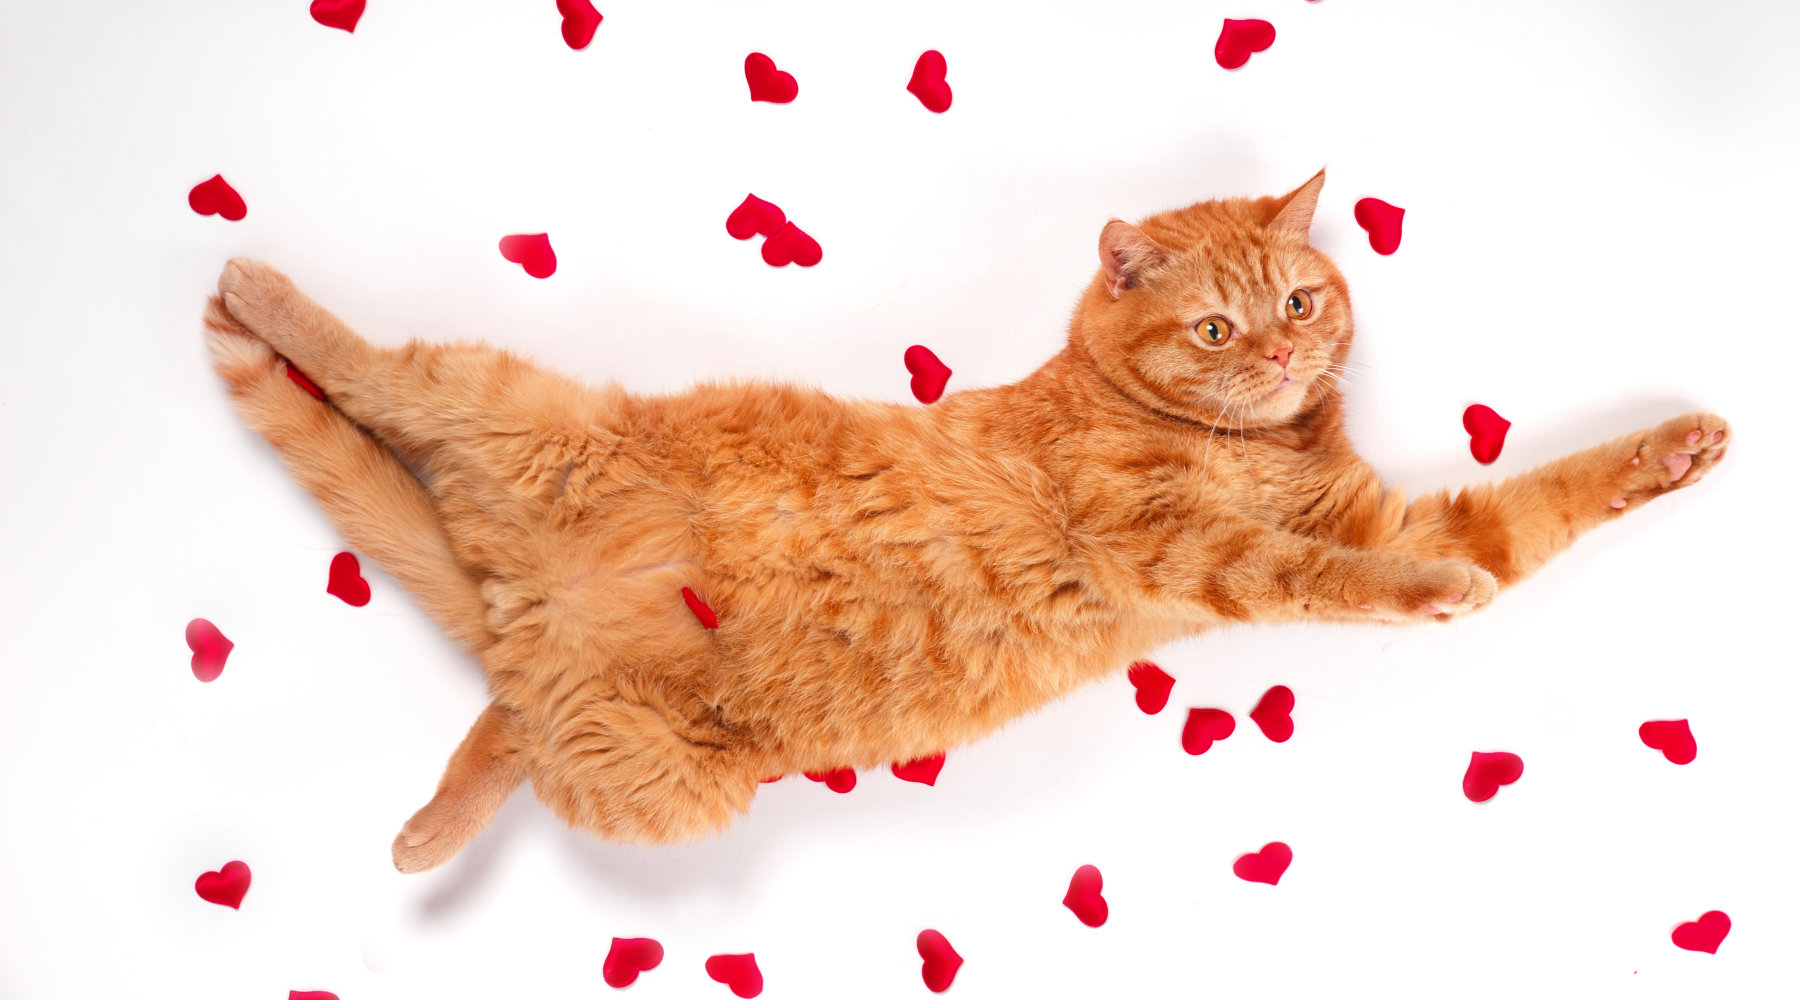 Cat surrounded by red hearts